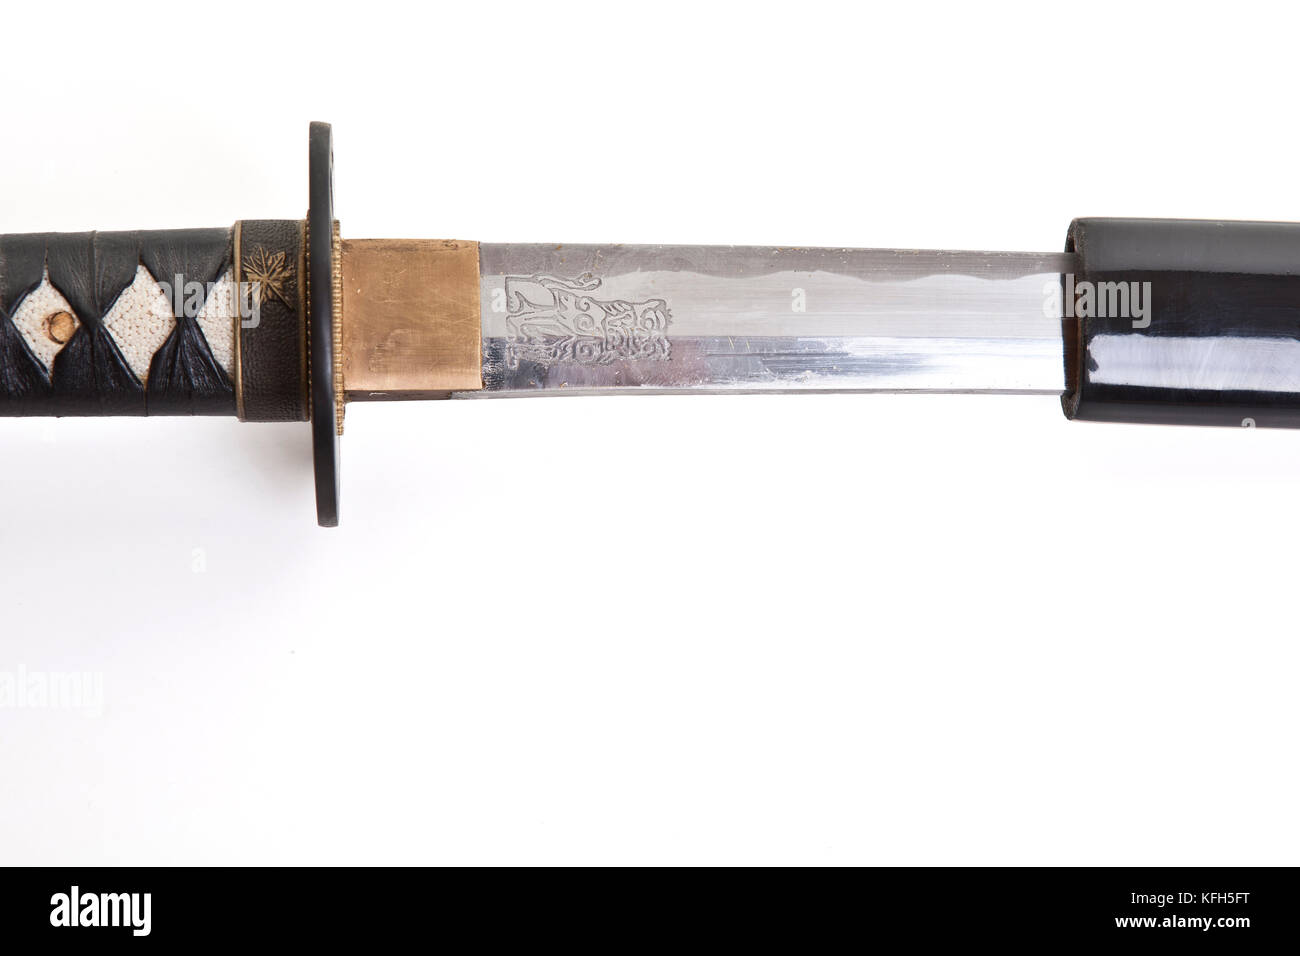 Detail from the very sharp steel blade on a Japanese Samurai sword or Katana.  The blade has to be constantly kept waxed to protect against oxidizatio  Stock Photo - Alamy